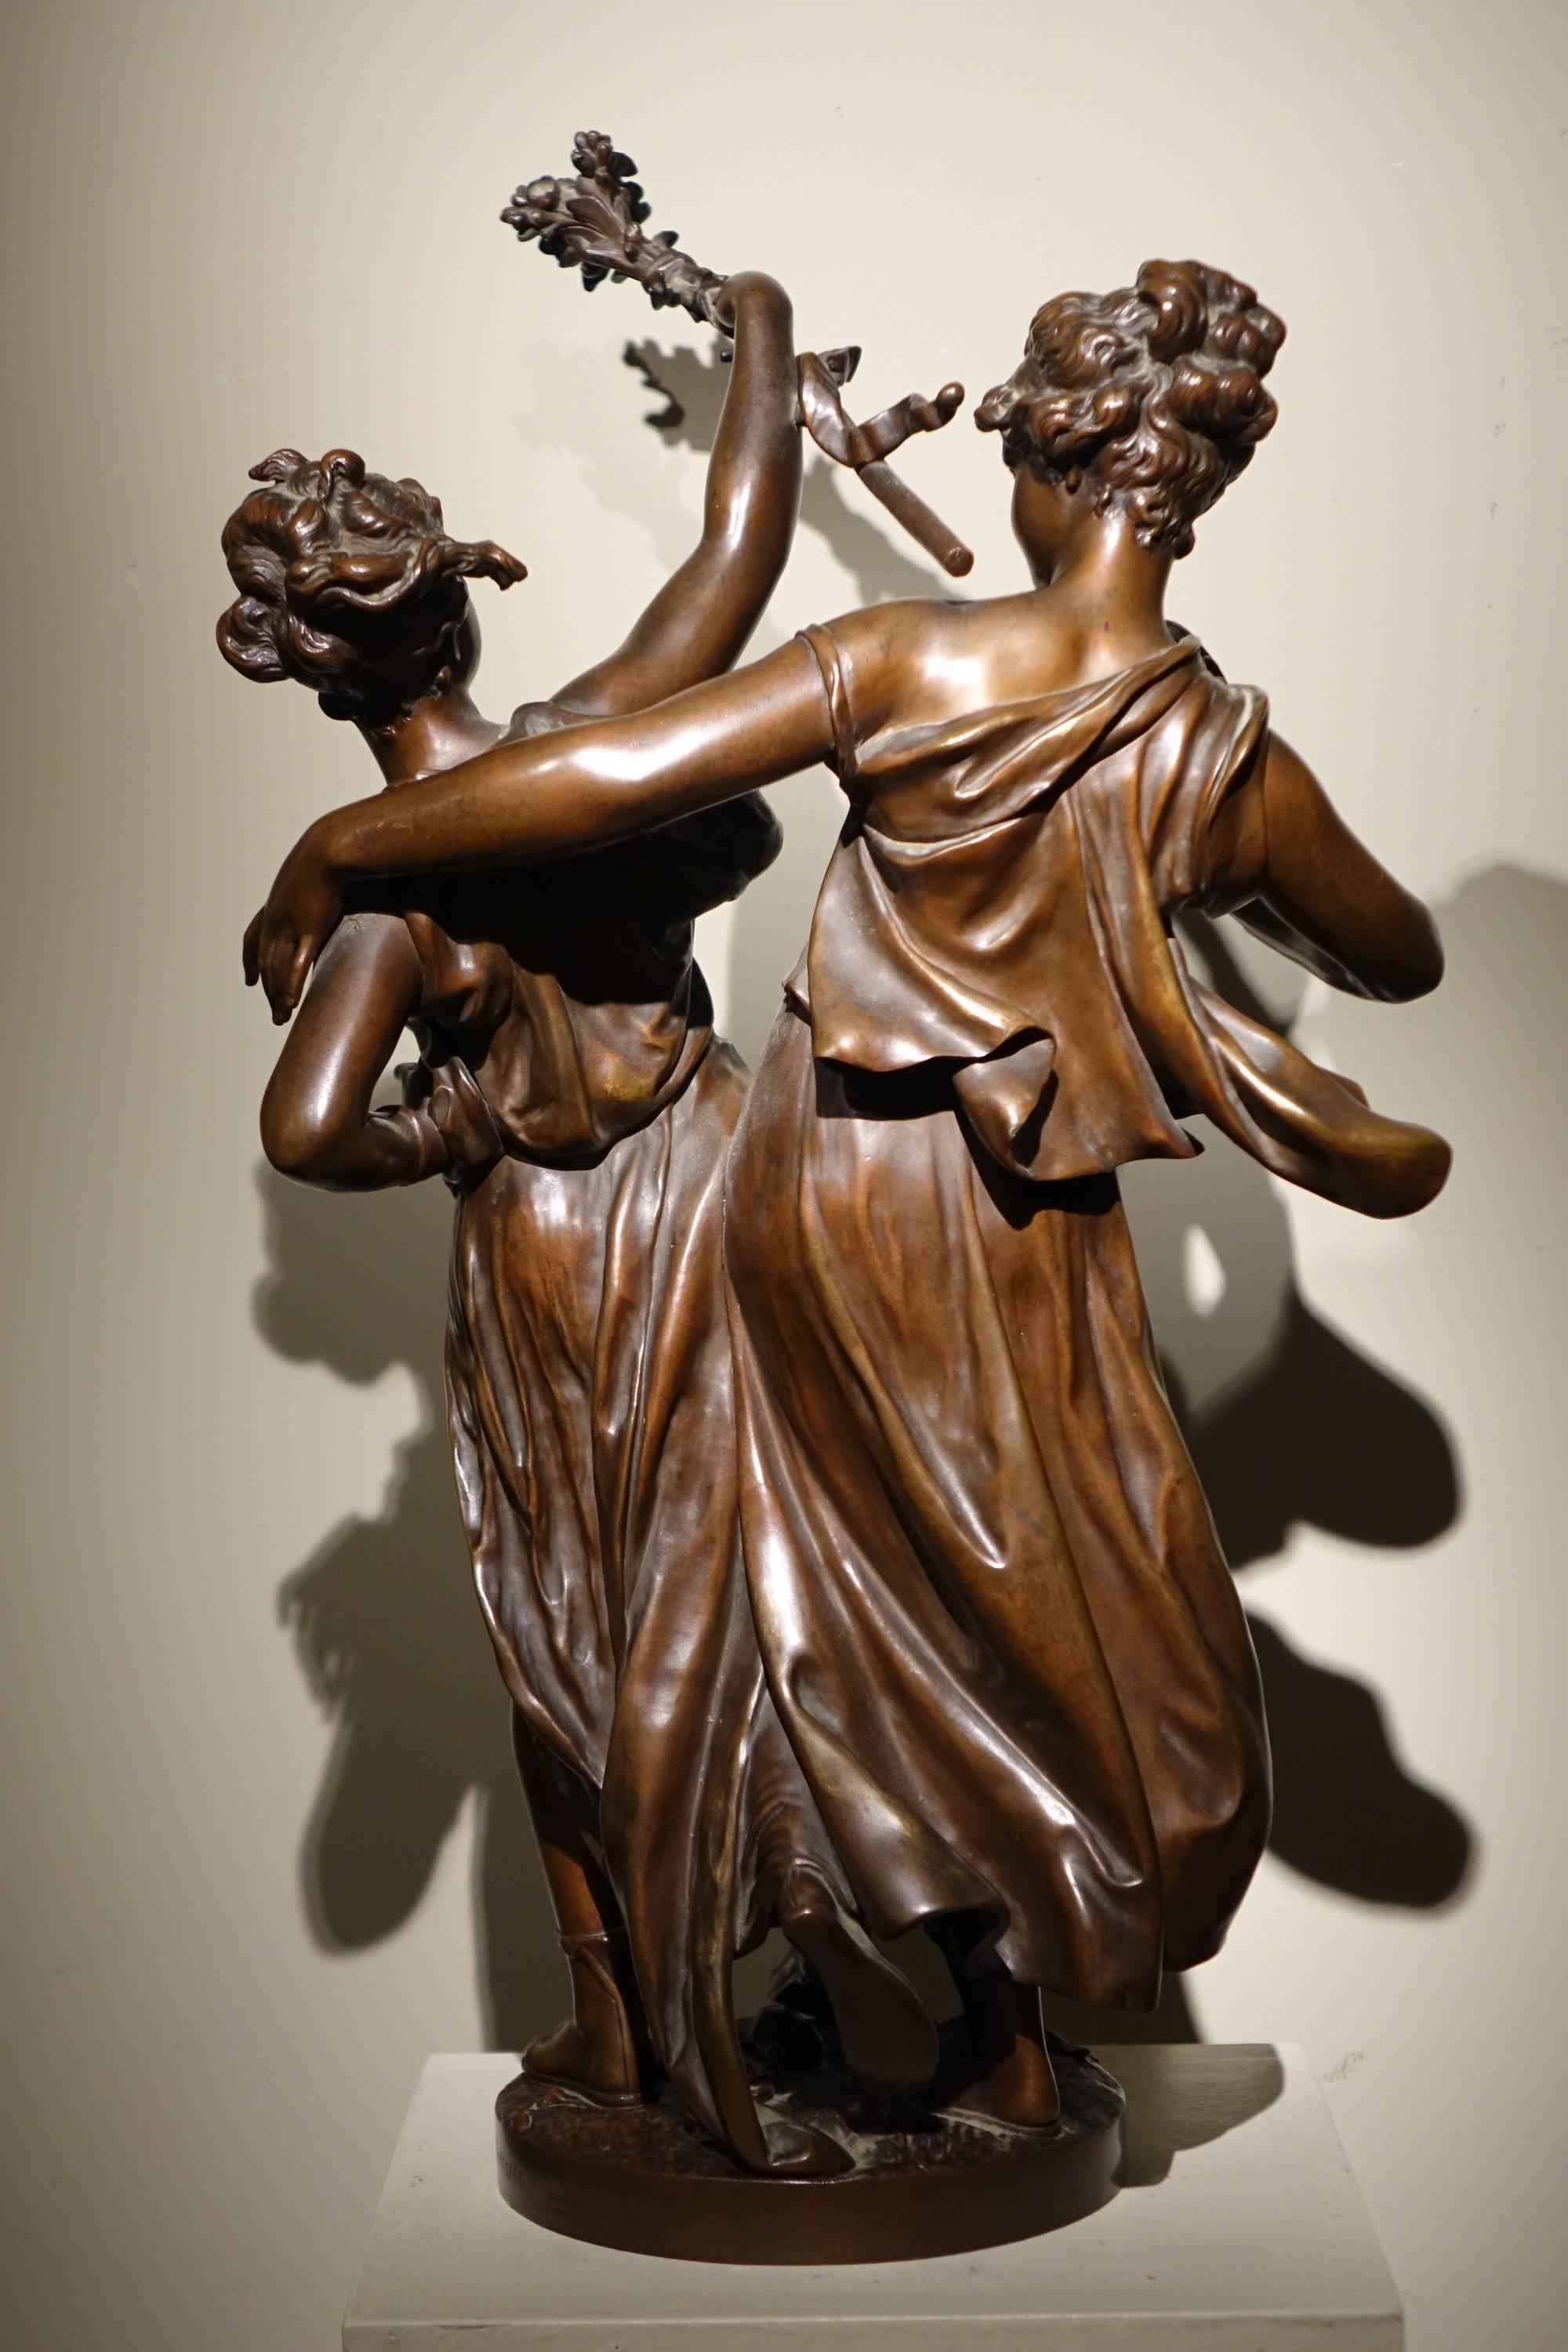 Bacchanal or two girls dancing and playing tambourine, one carrying a stick decorated with flowers.
Bronze  sculpture with brown patina signed Etienne Henry Dumaige 1830-1888
Eleve of J.Feuchere, exhibited at the salon from 1862-1877. 2nd medal in